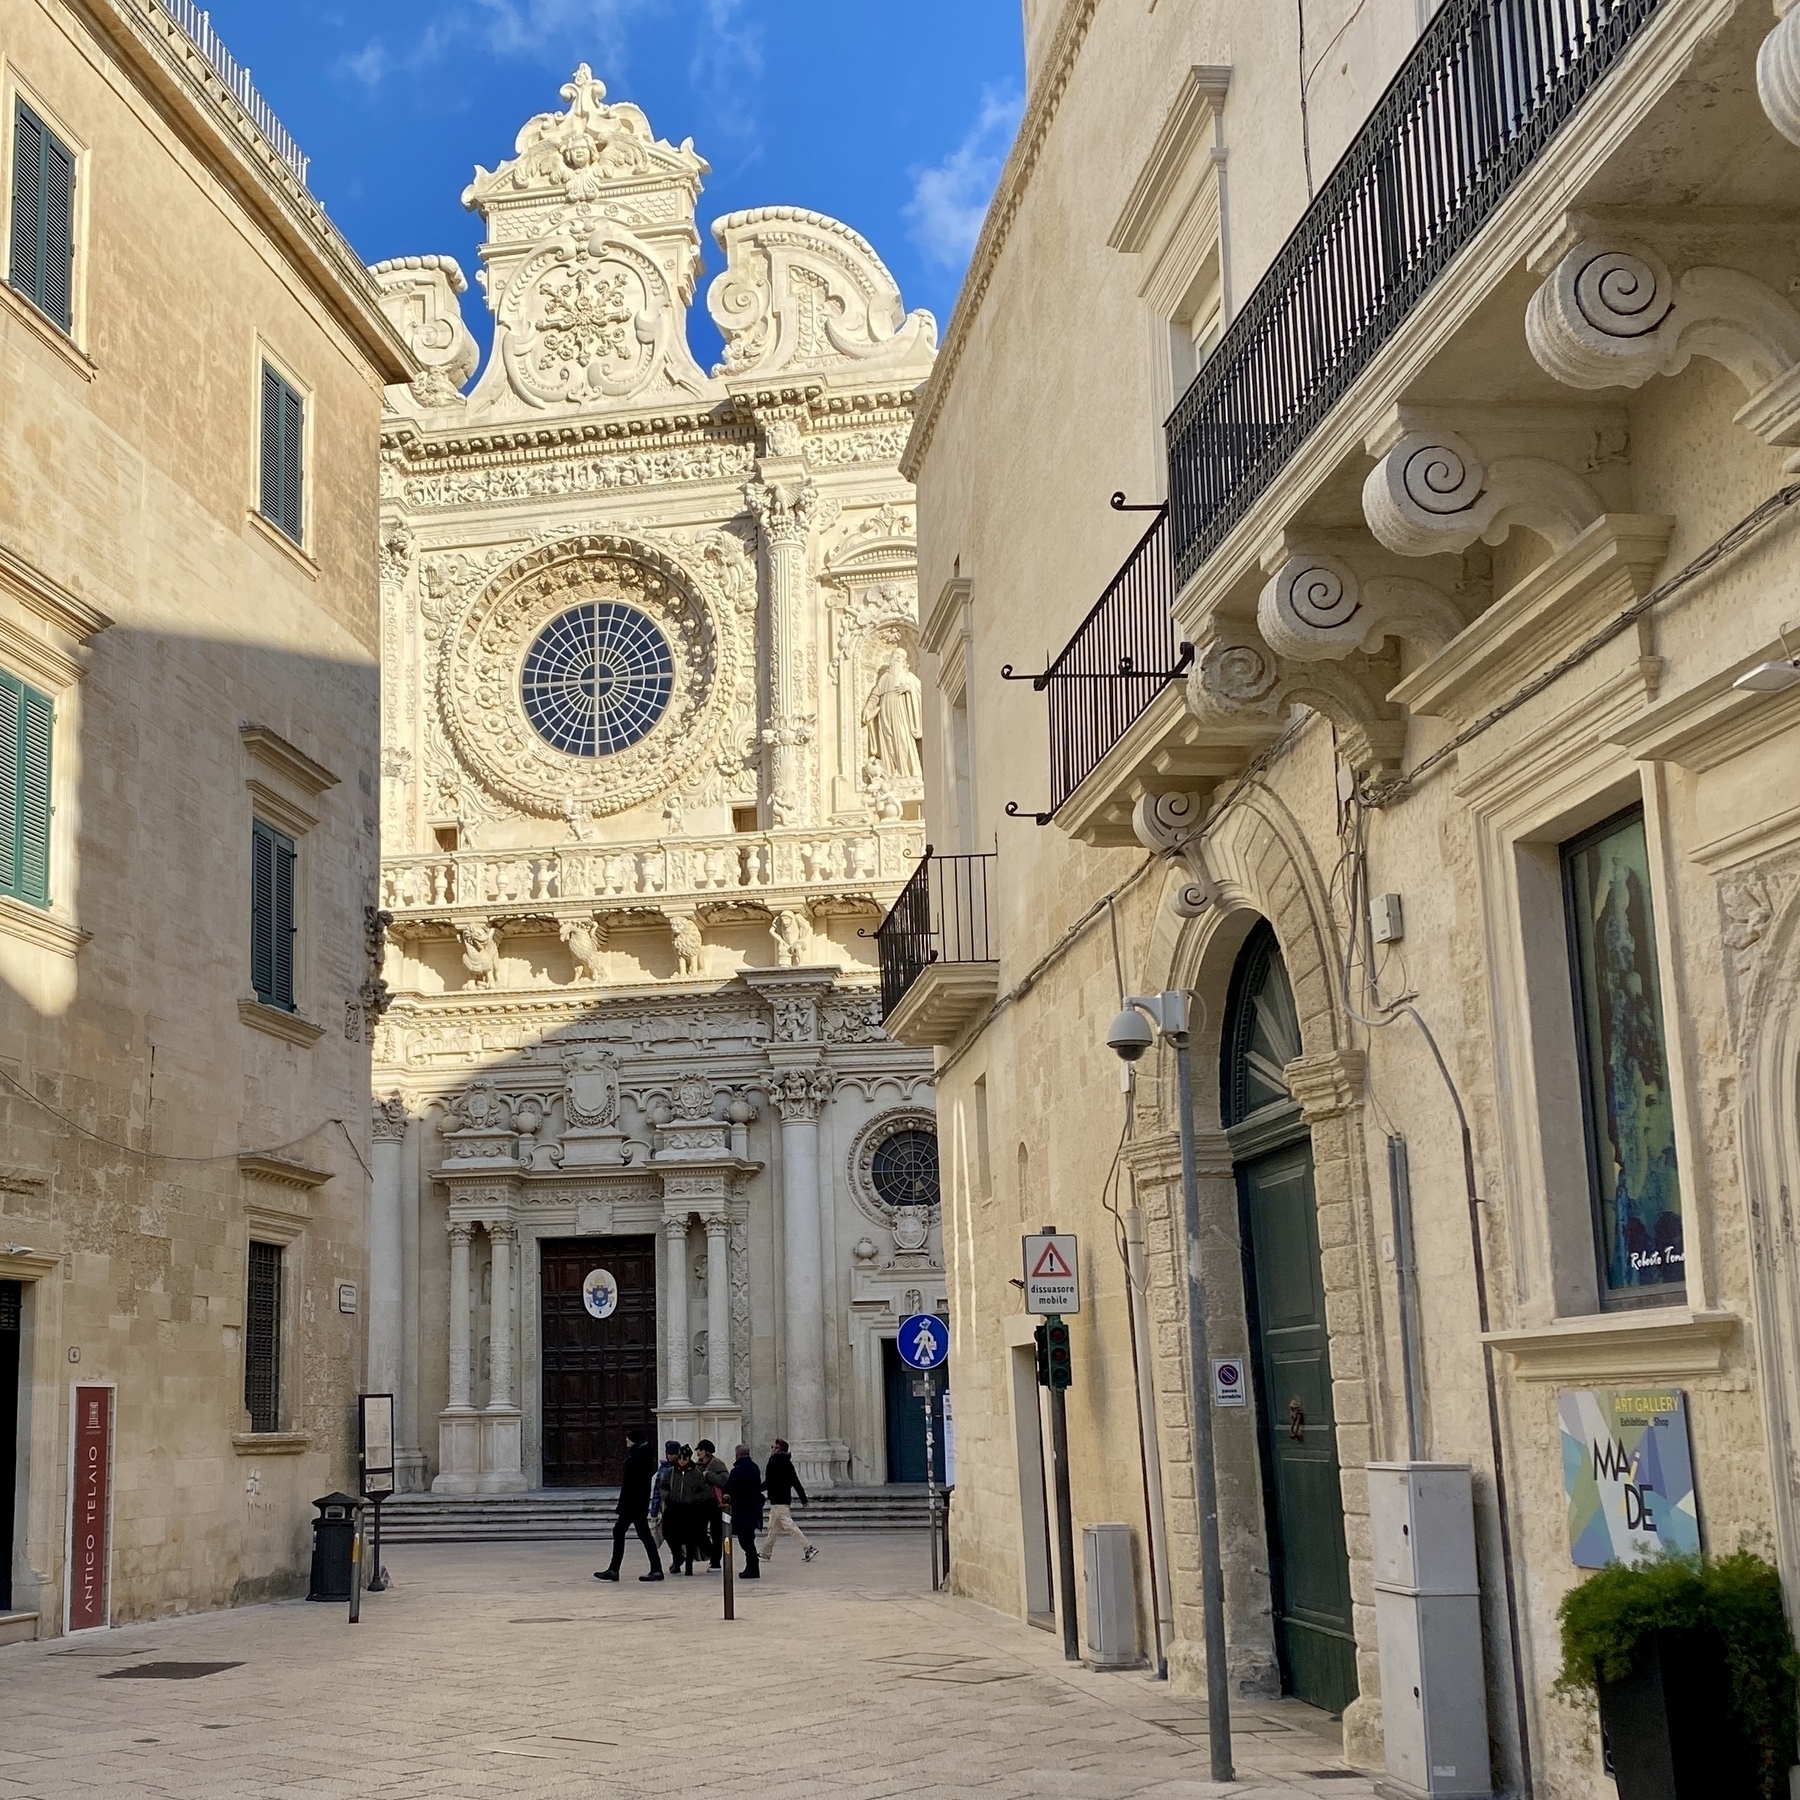 The front of Santa Croce church in Lecce, Italy